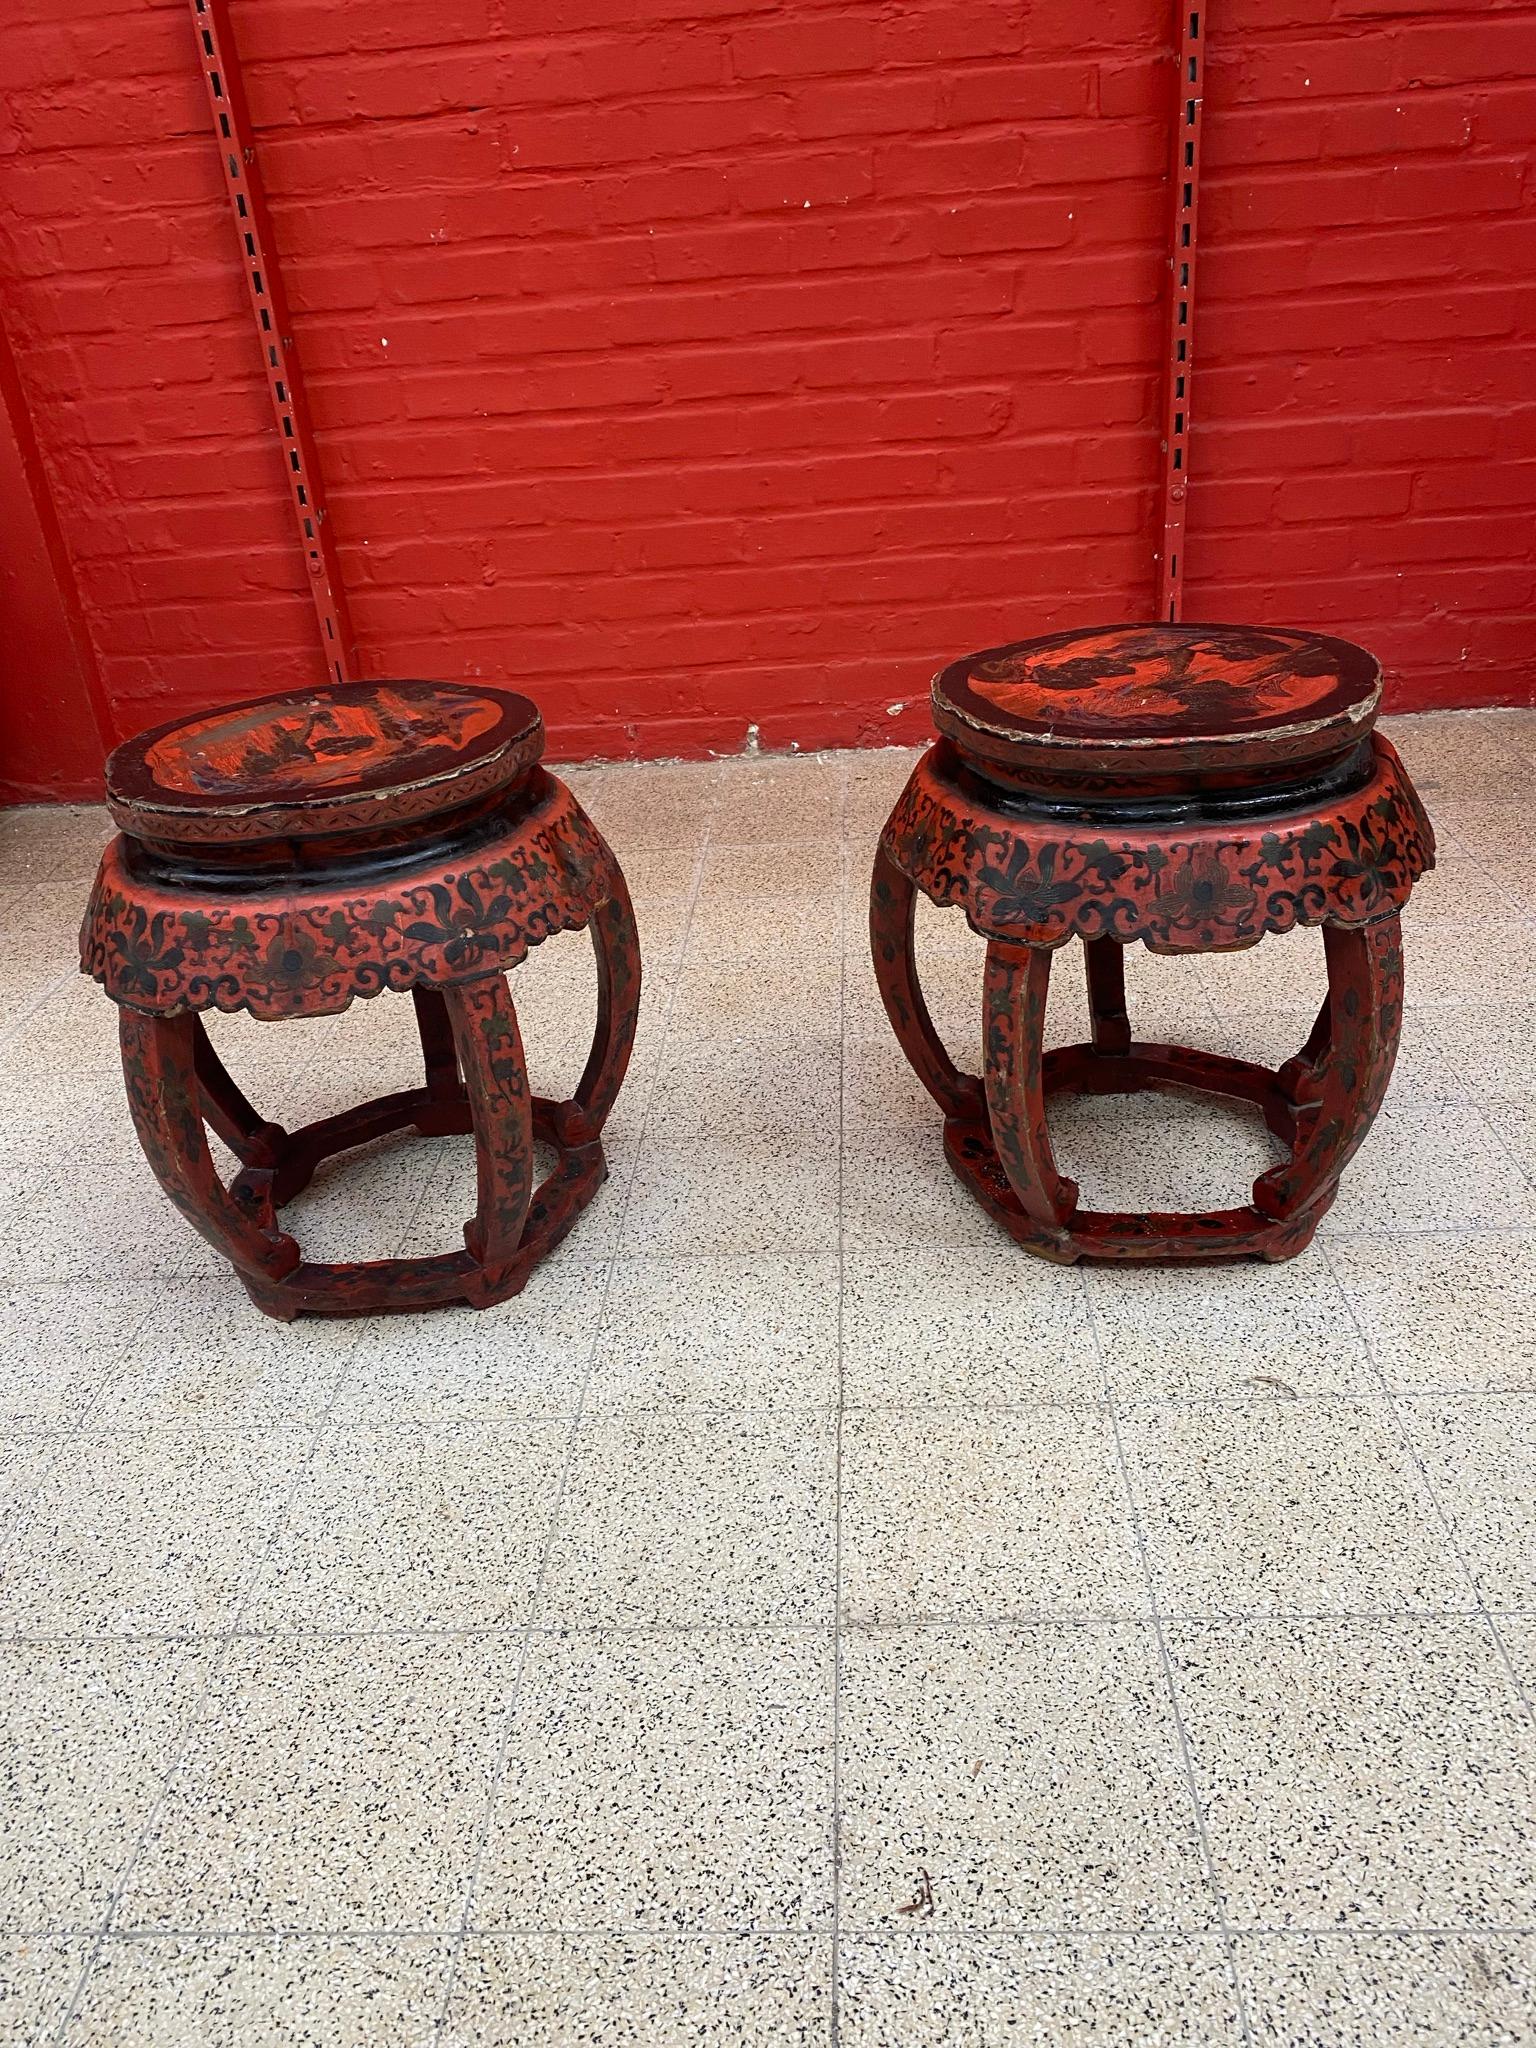 Asian Pair of Side Tables in Lacquered Wood circa 1900 a Lot of Charm, with Many Lacks For Sale